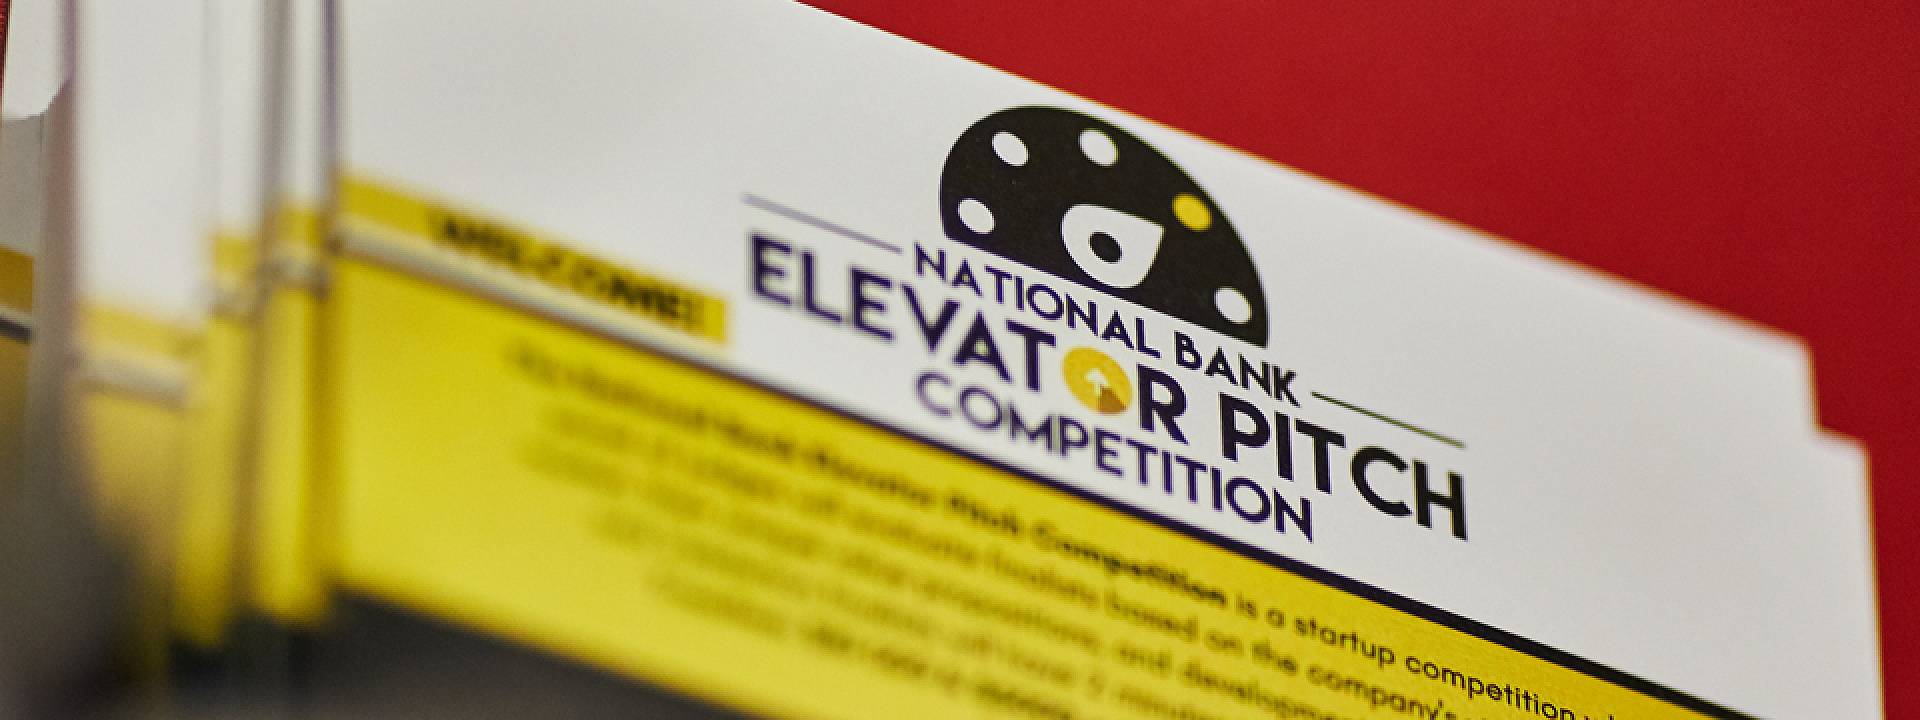 National Bank Elevator Pitch Competition